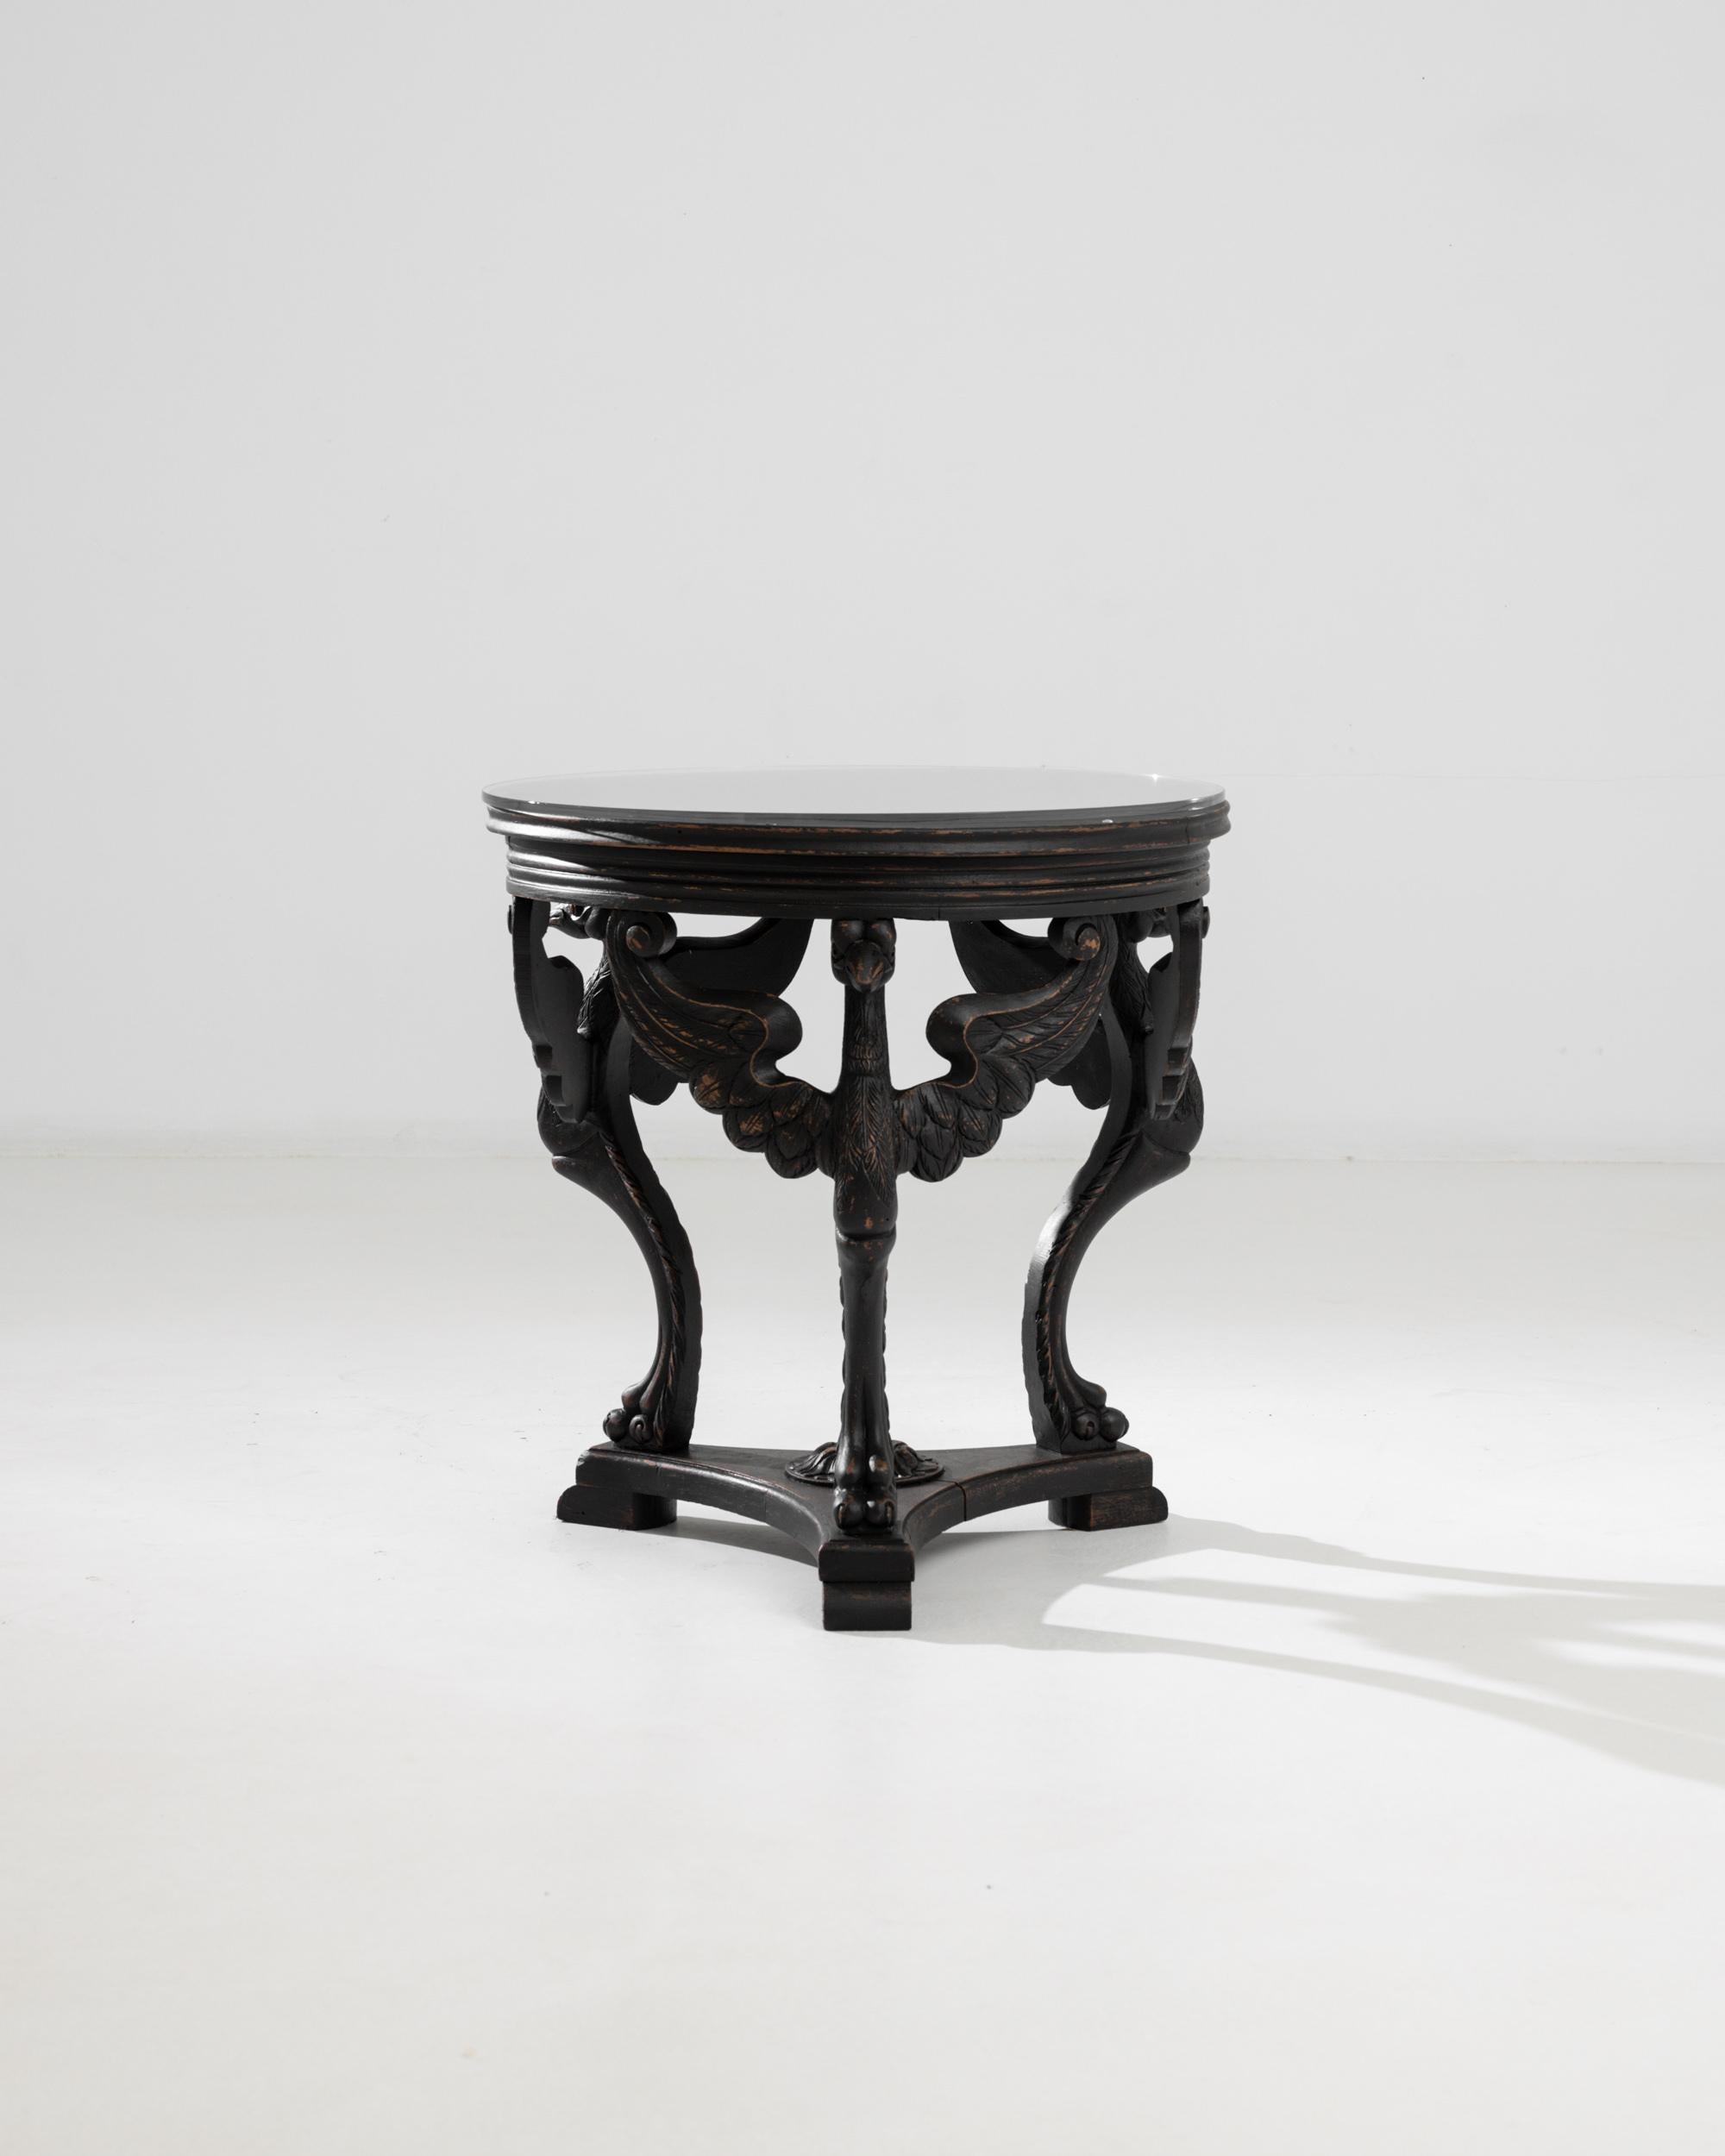 A trio of carved birds form the legs of this circular wooden table, creating a unique Belle Epoque silhouette. Made in France at the turn of the century, the birds bear a curious resemblance to a swan or an eagle. Though we cannot know why the maker